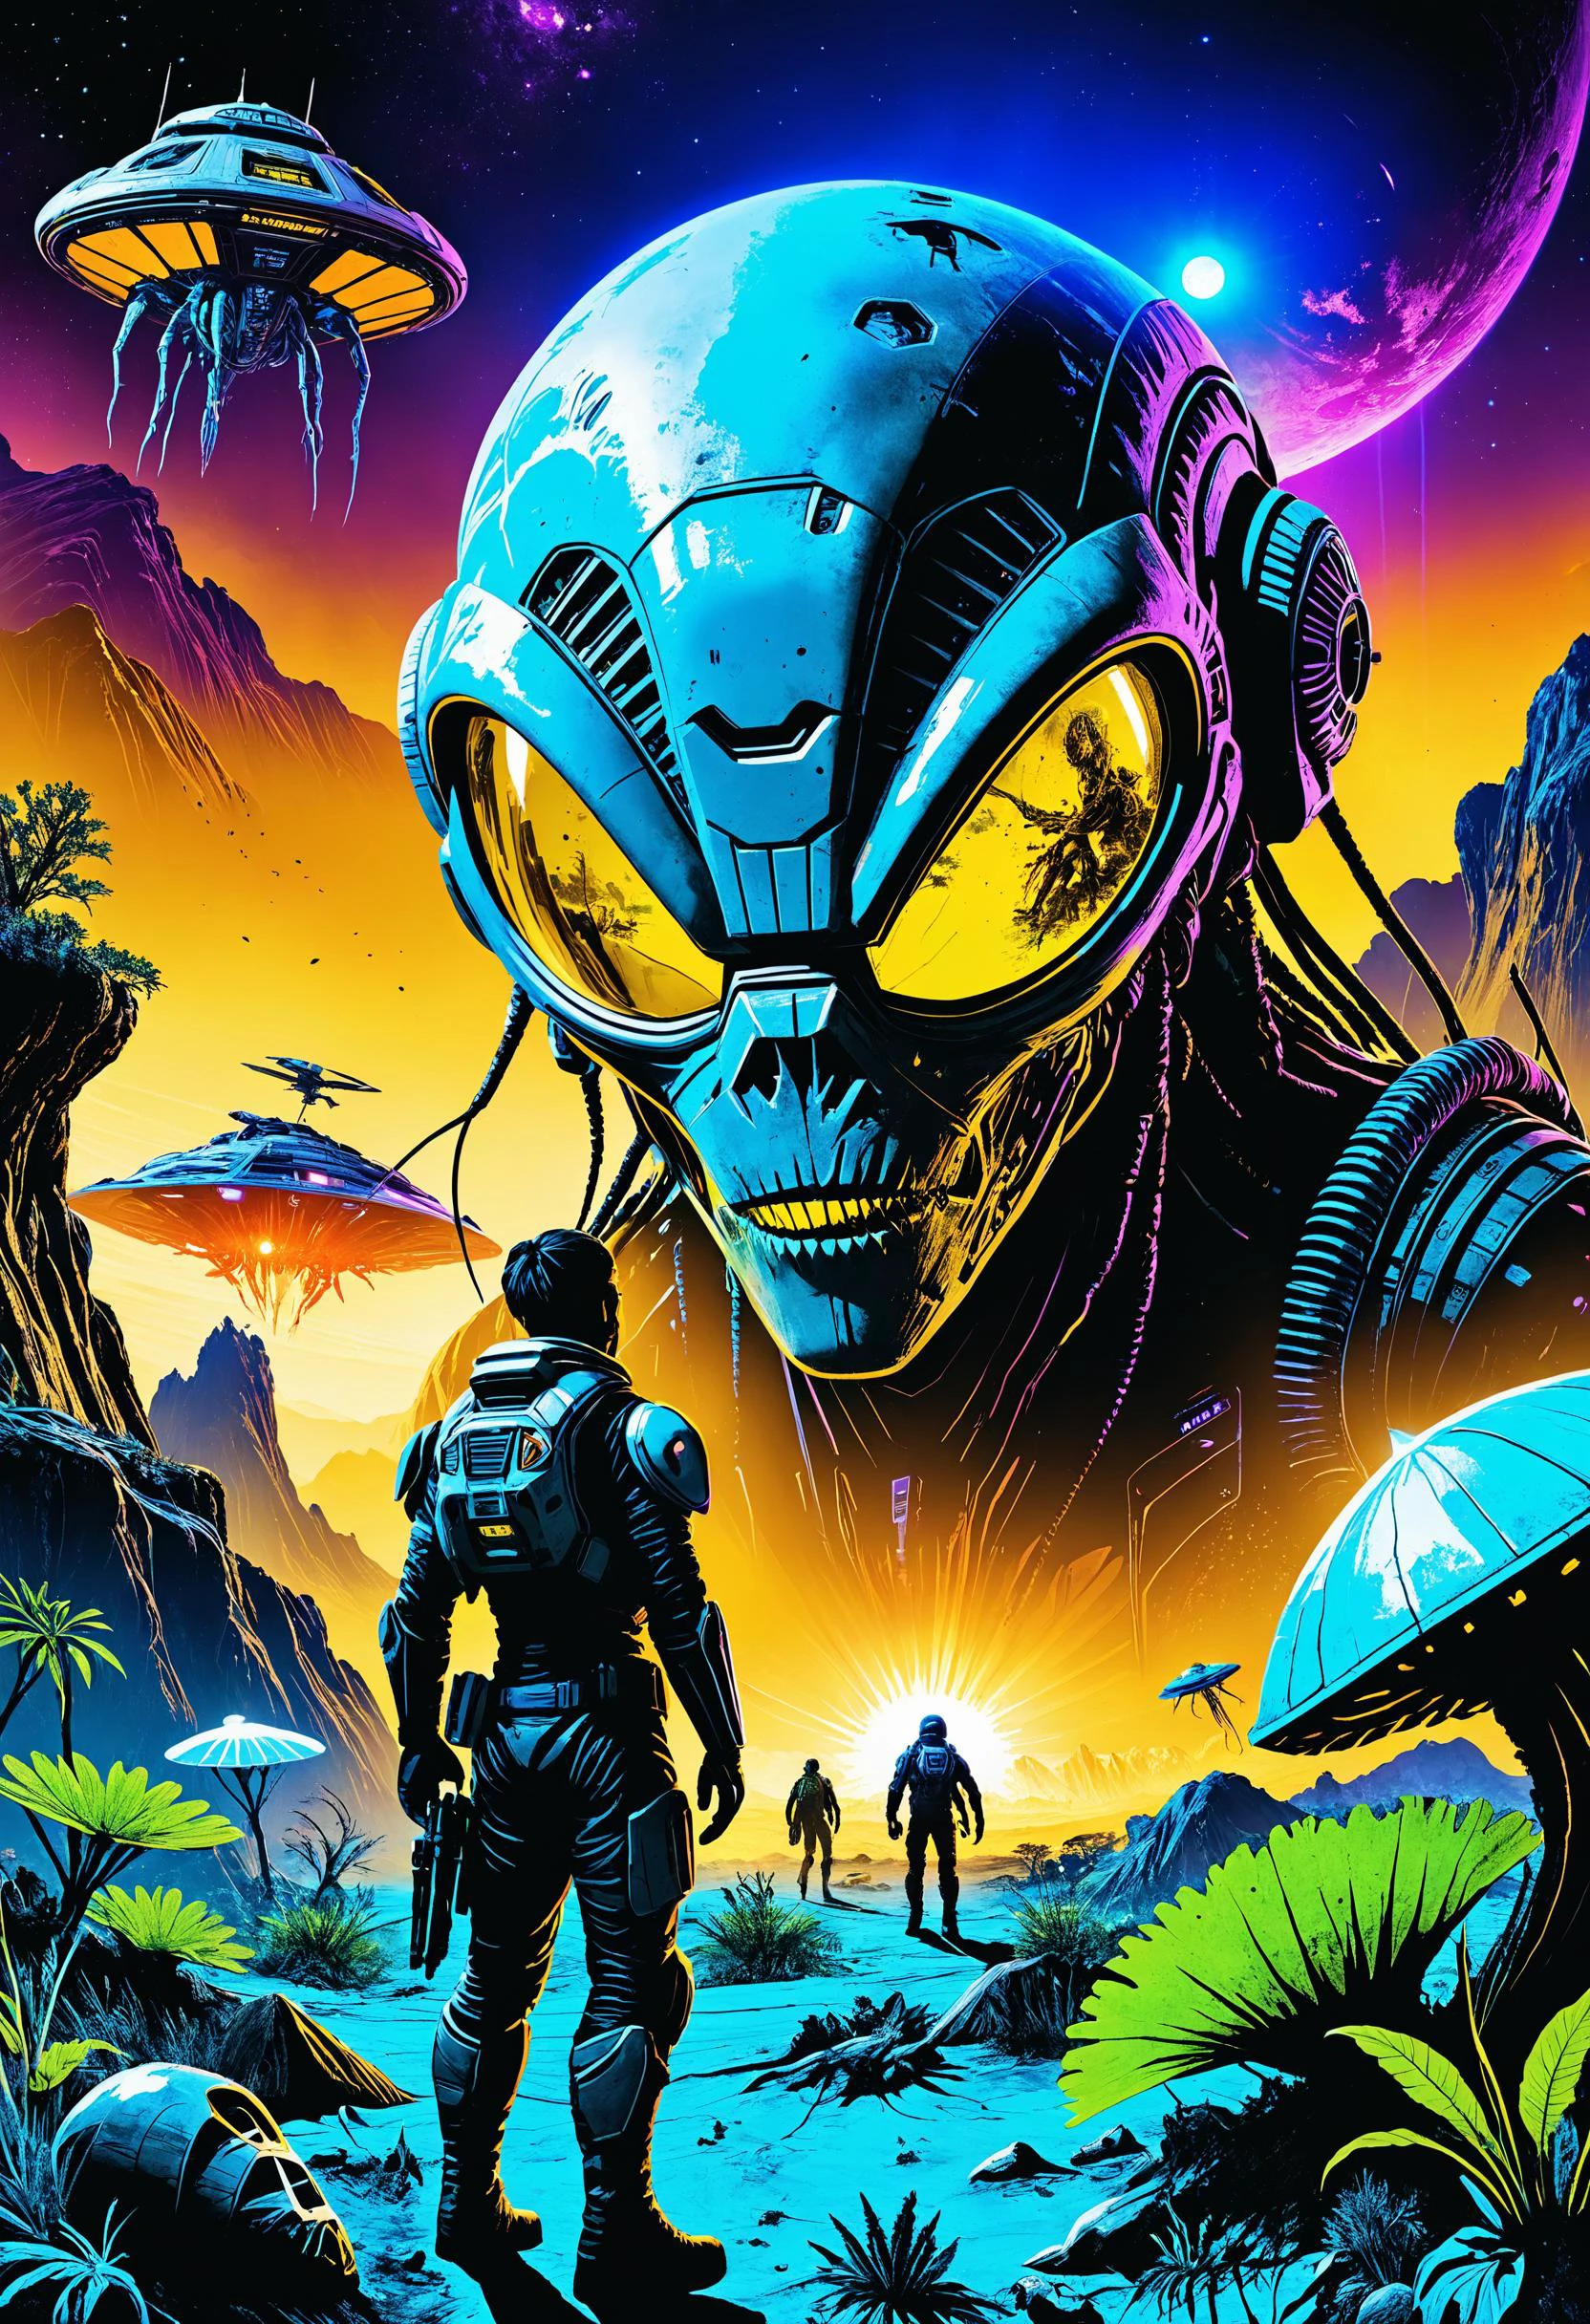 A colony ship crash-lands on a hostile alien world, stranding its passengers in a desperate fight for survival against the planet's indigenous inhabitants, Cybersurgeon with neural enhancement expertise in the foreground, blacklight makeup, 